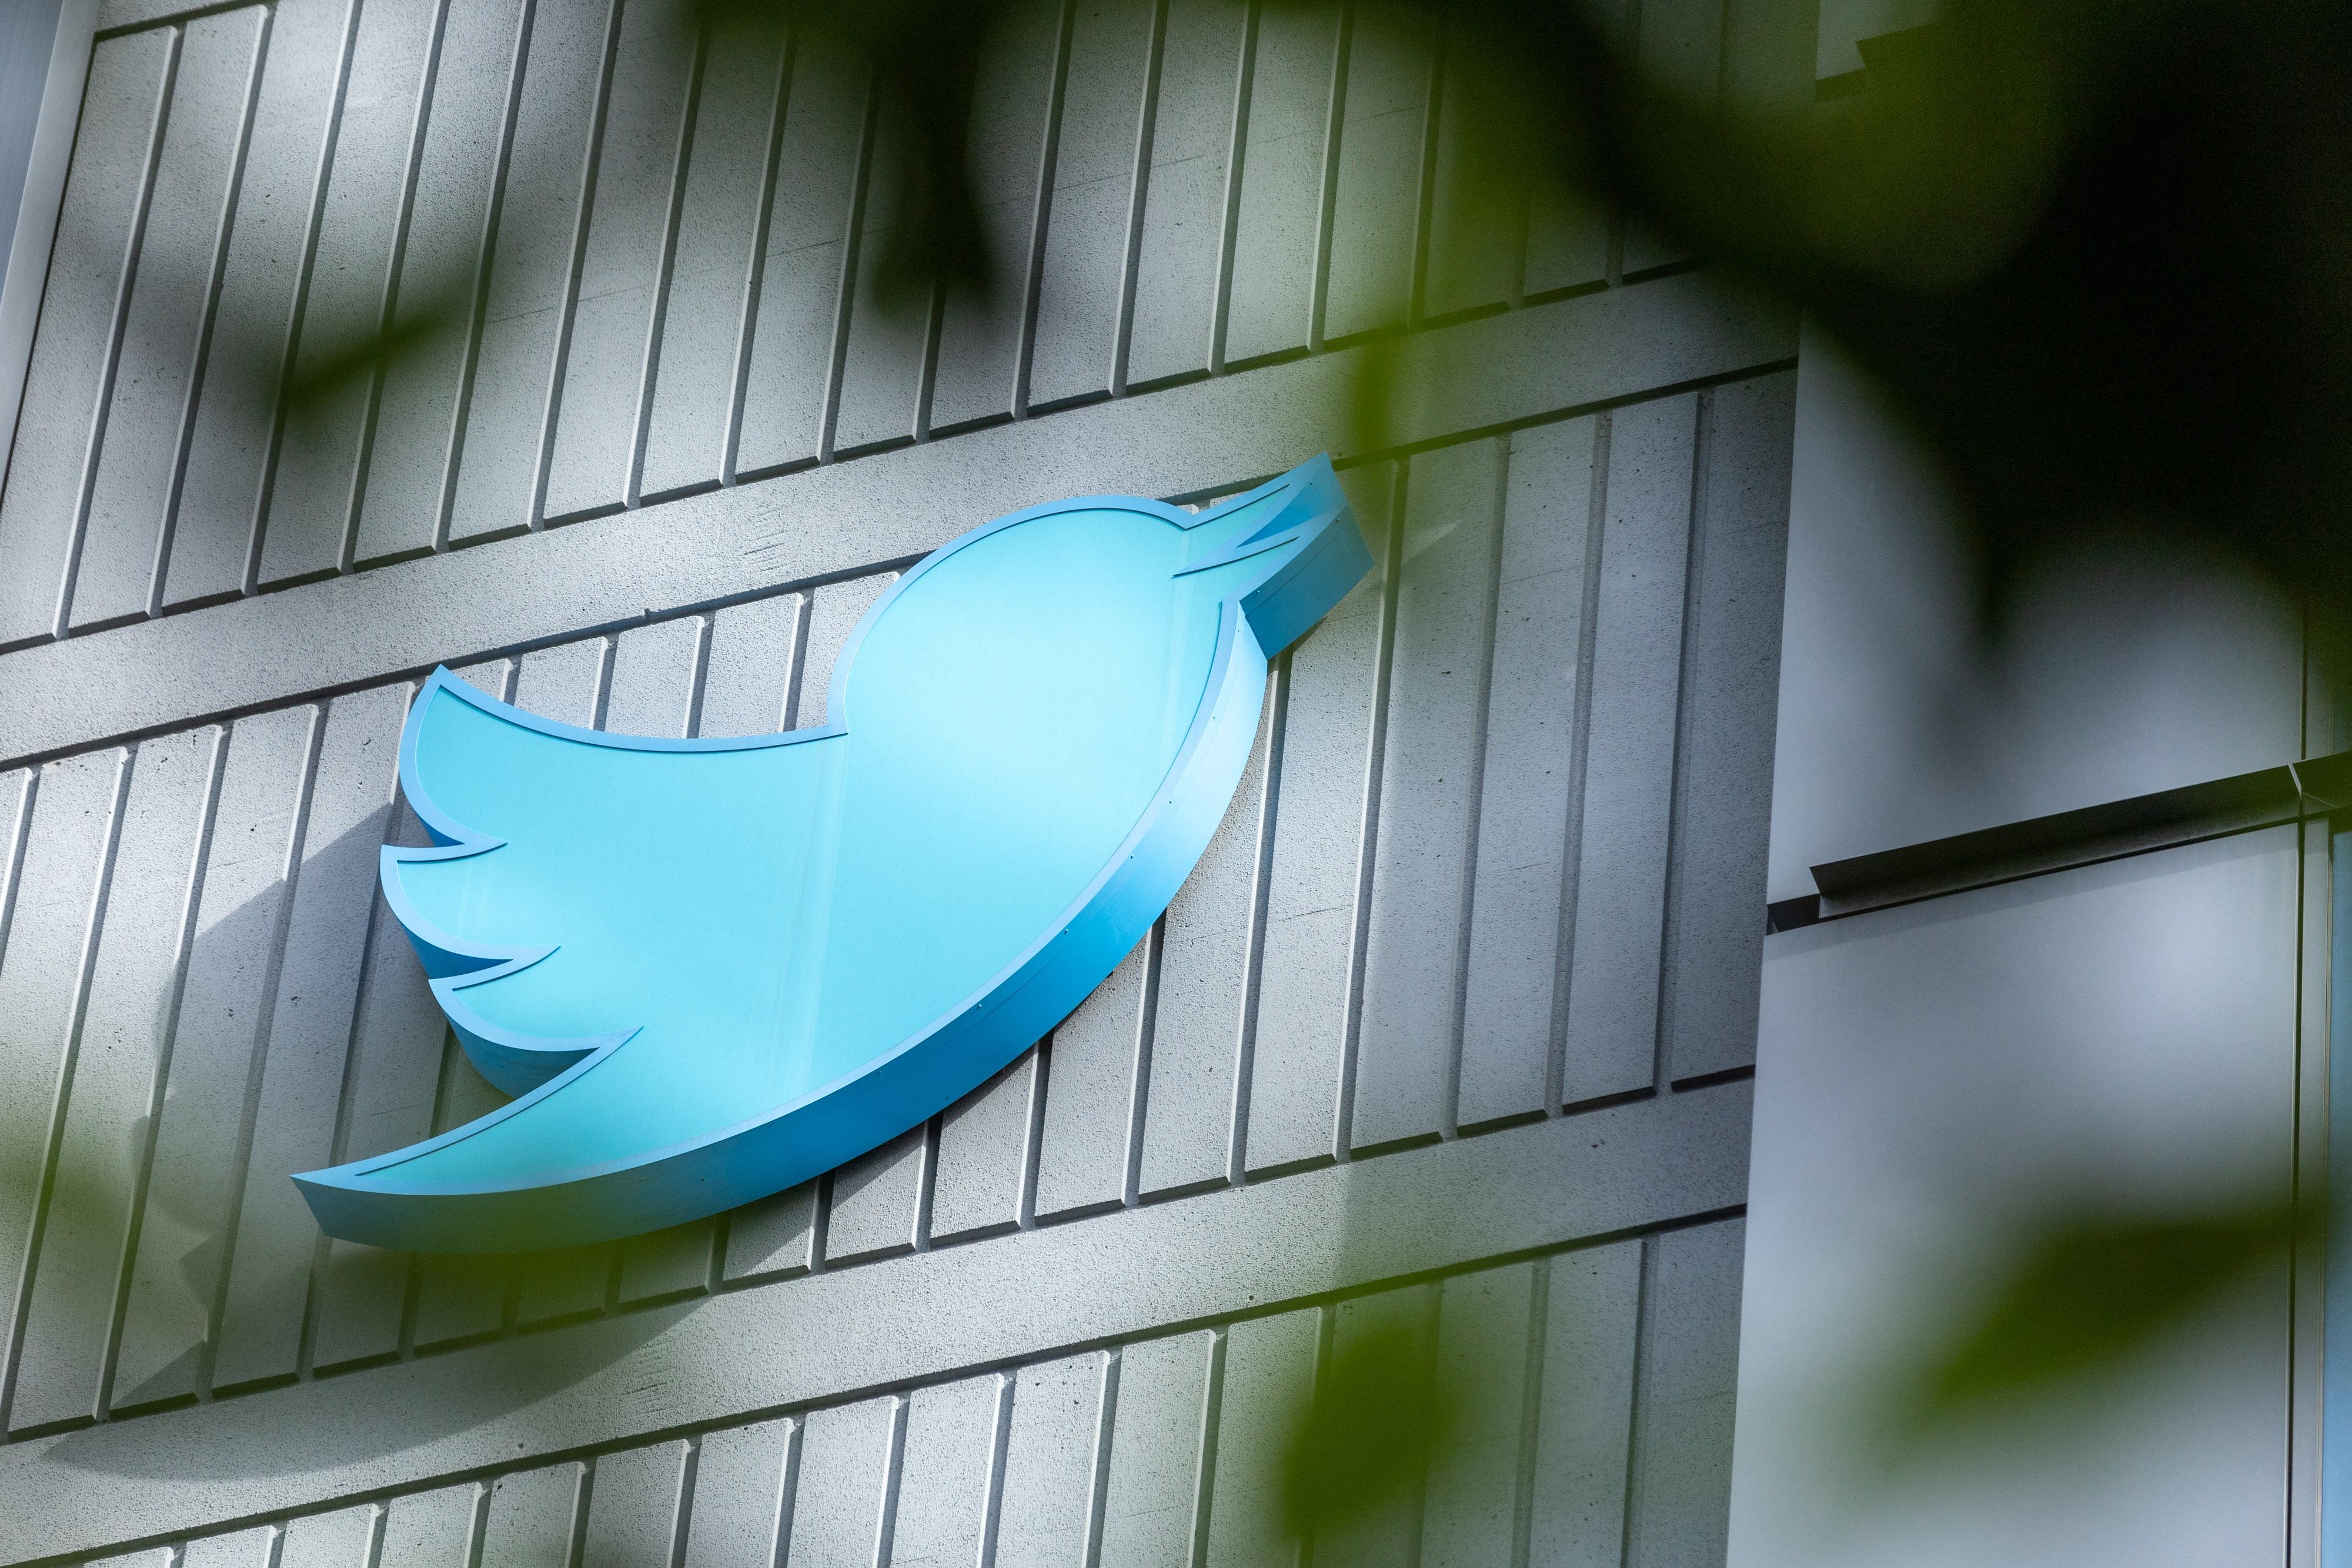 The Twitter logo on the side of a building